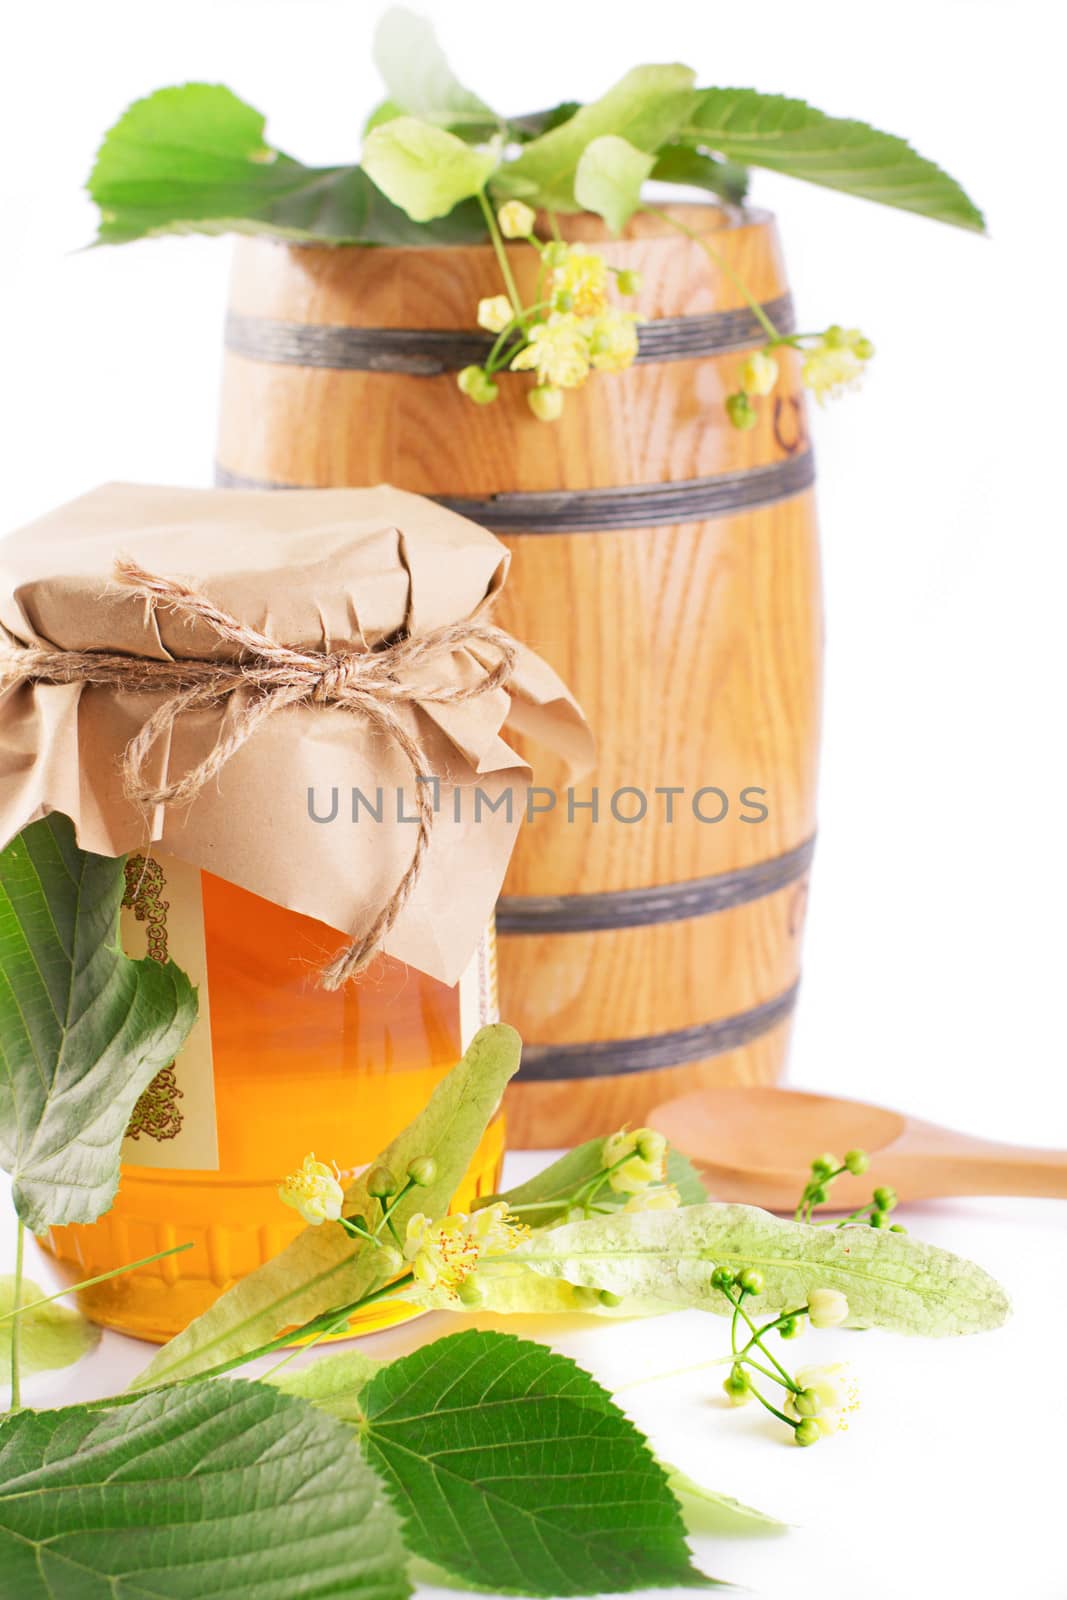 Linden honey jar and barrel with flowers isolated on white